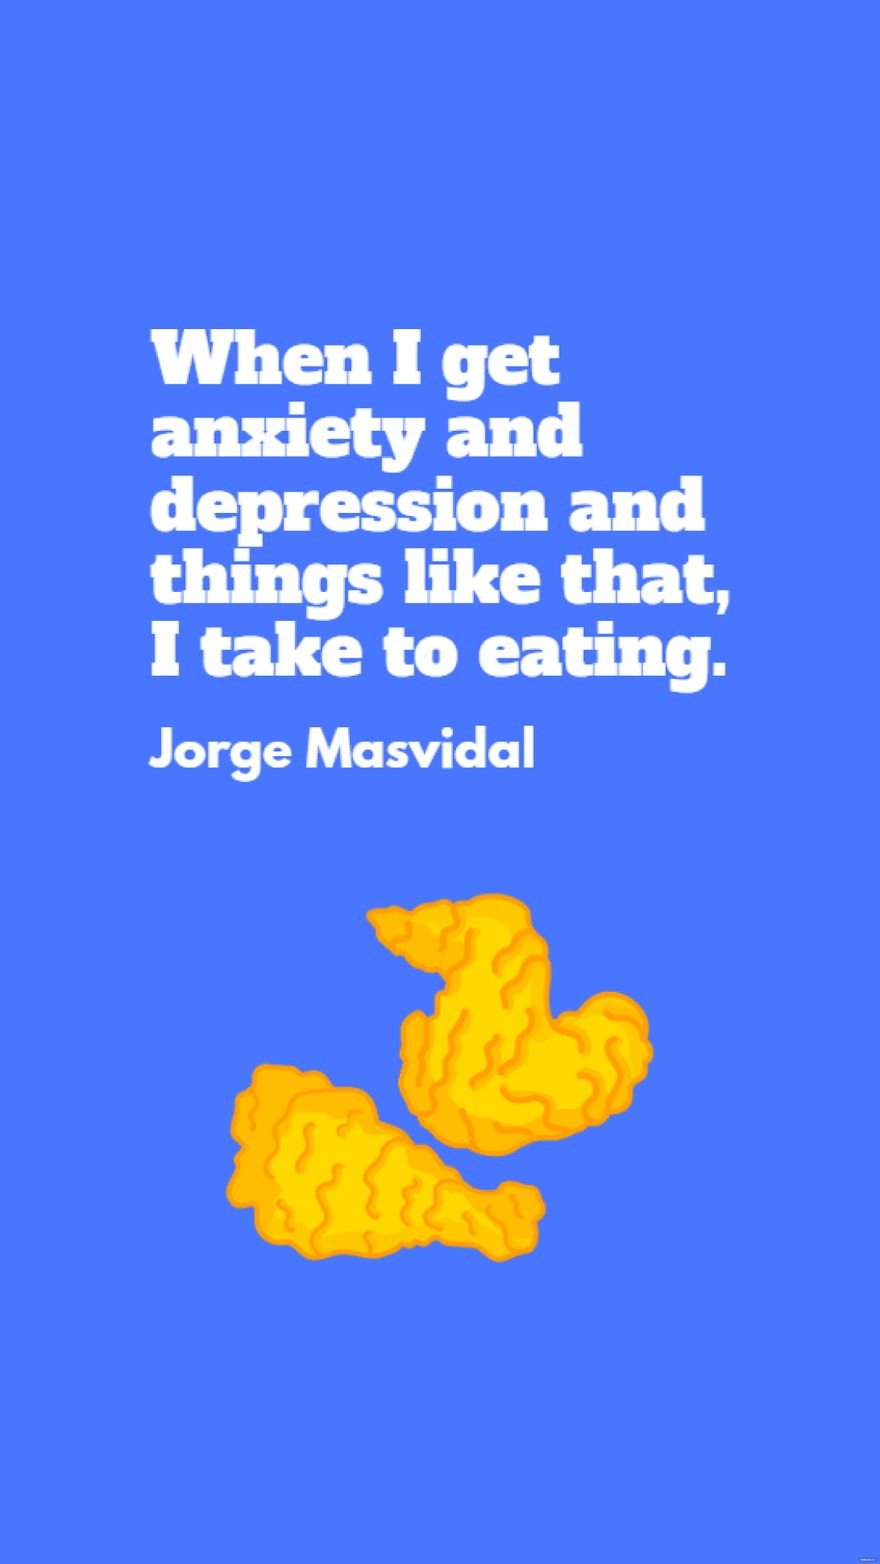 Free Jorge Masvidal - When I get anxiety and depression and things like that, I take to eating. in JPG